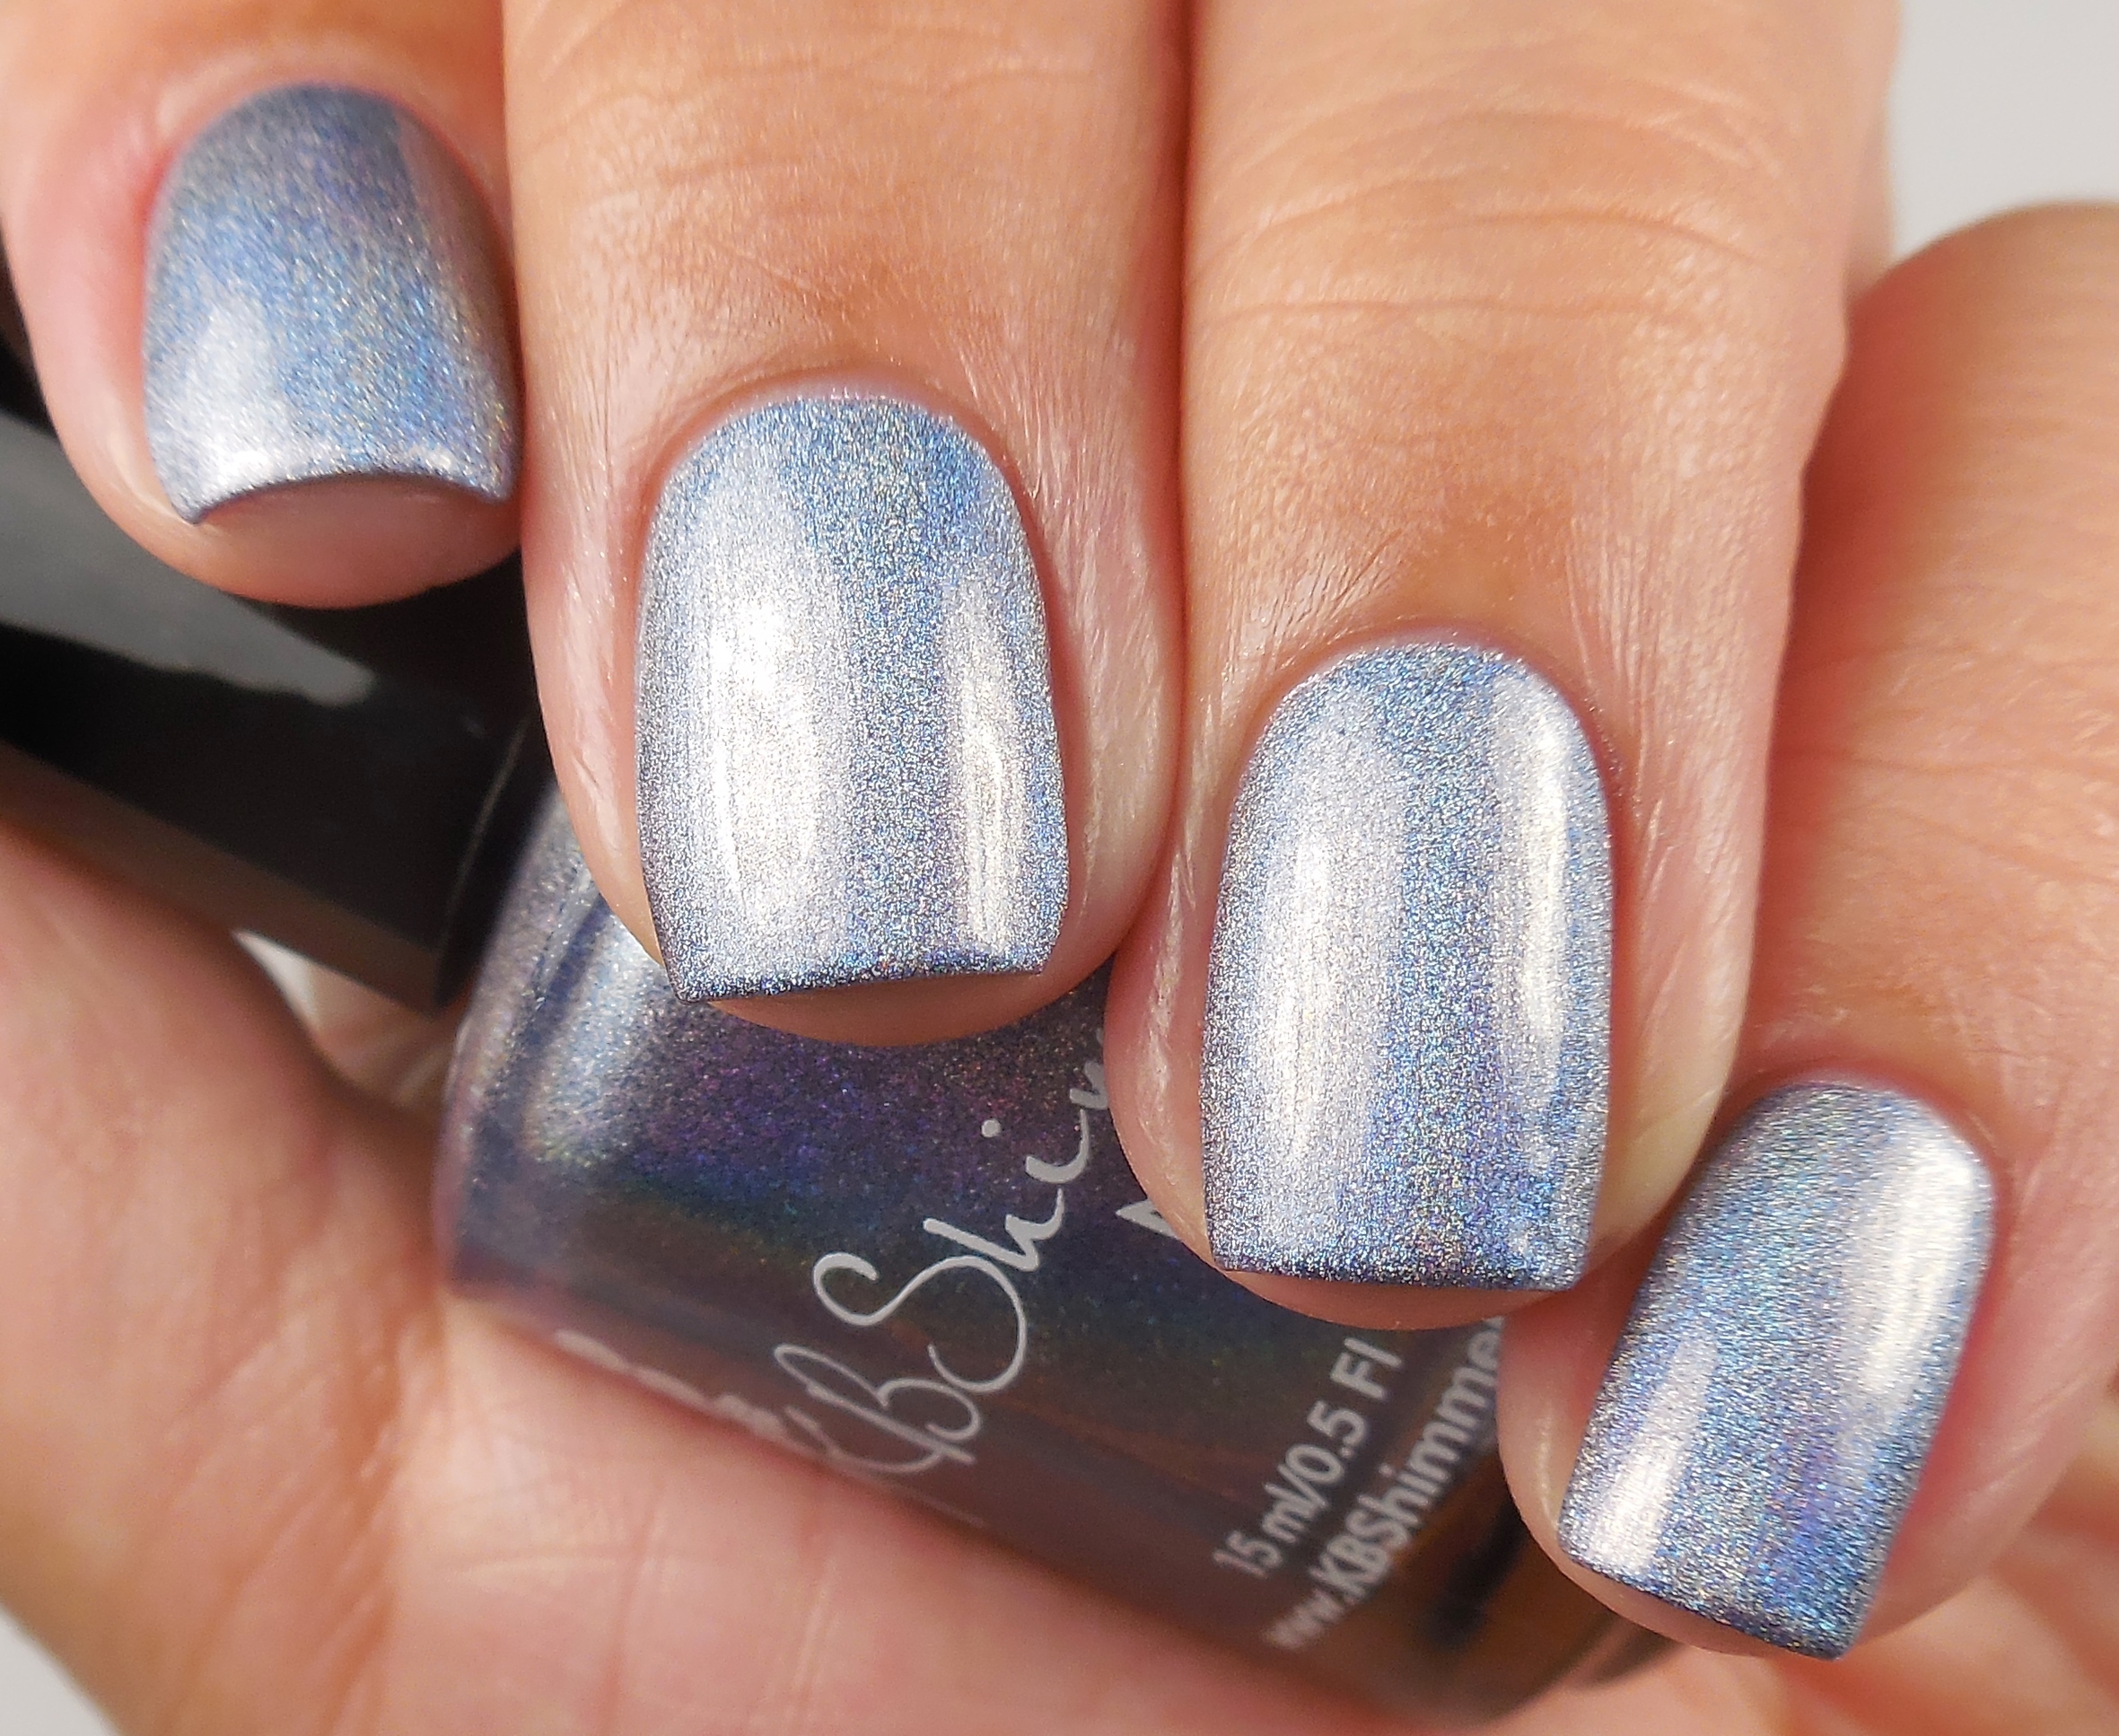 KBShimmer Purr-fectly Paw-some 1